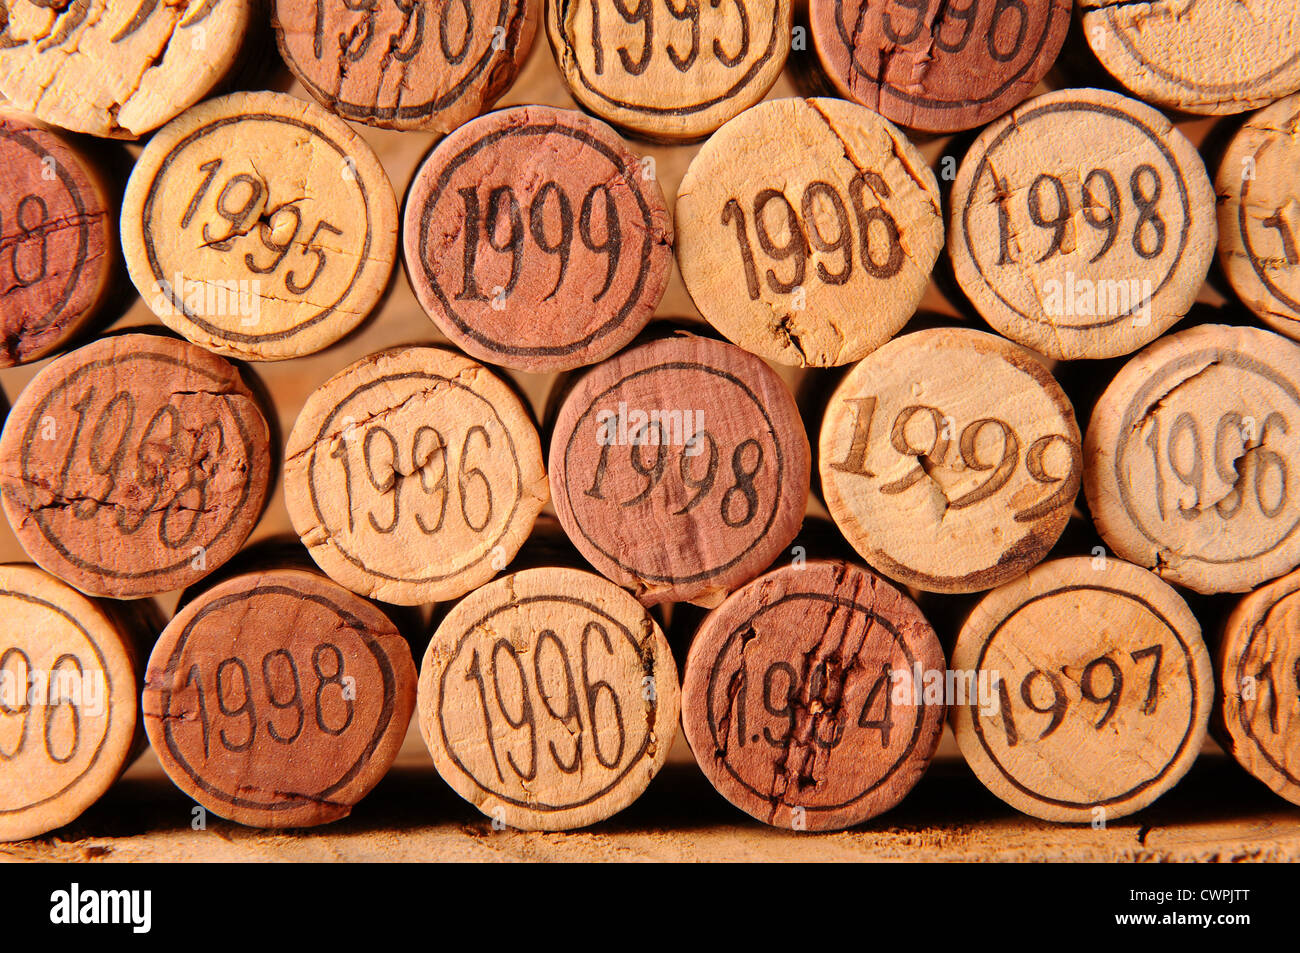 Closeup of several wine corks with the vintage year stamped into the end. Stock Photo